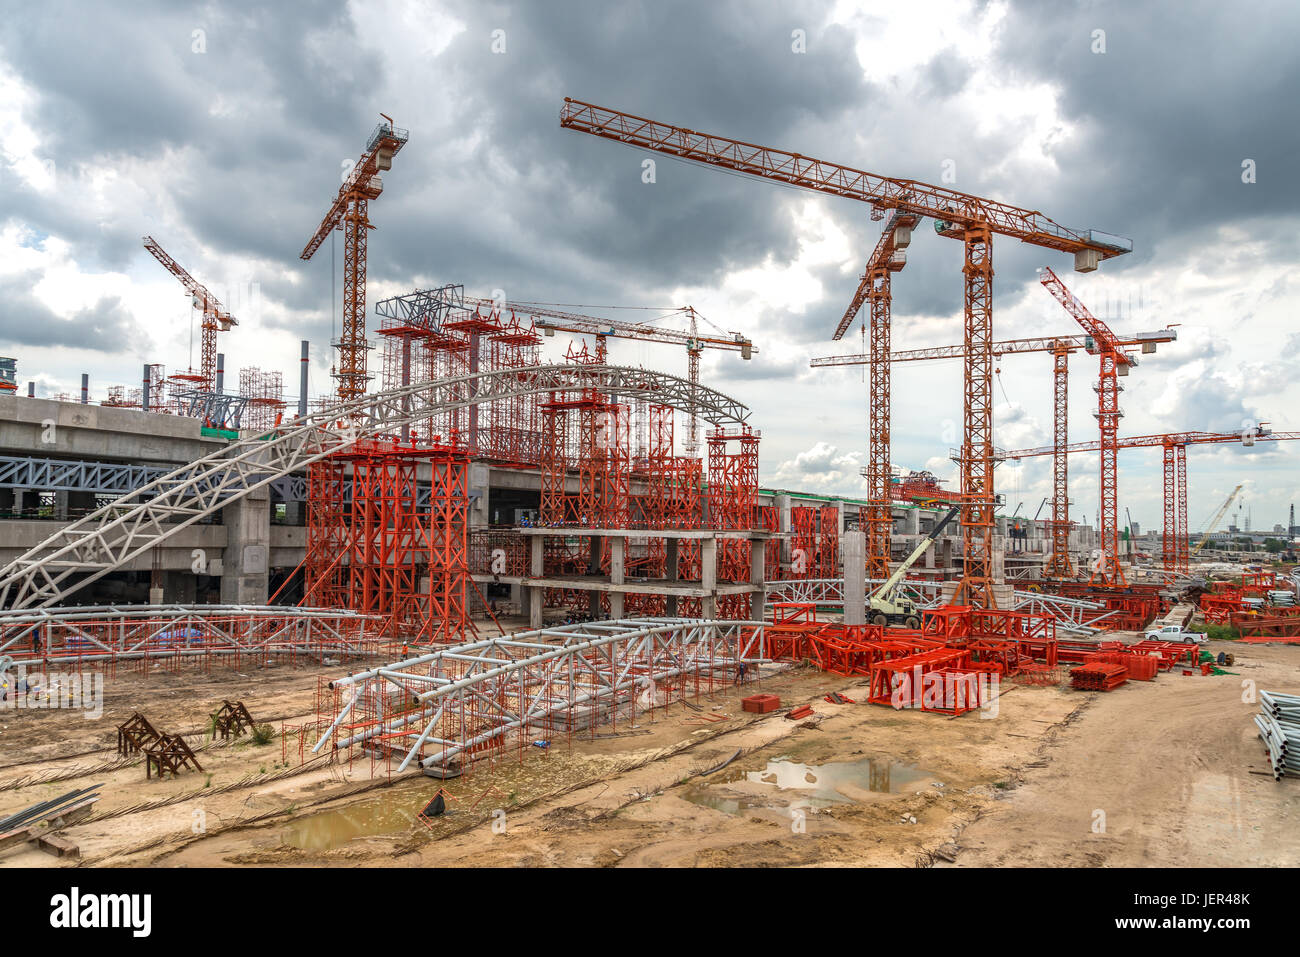 Construction Cranes Working on Expressway Site in Asia Stock Photo